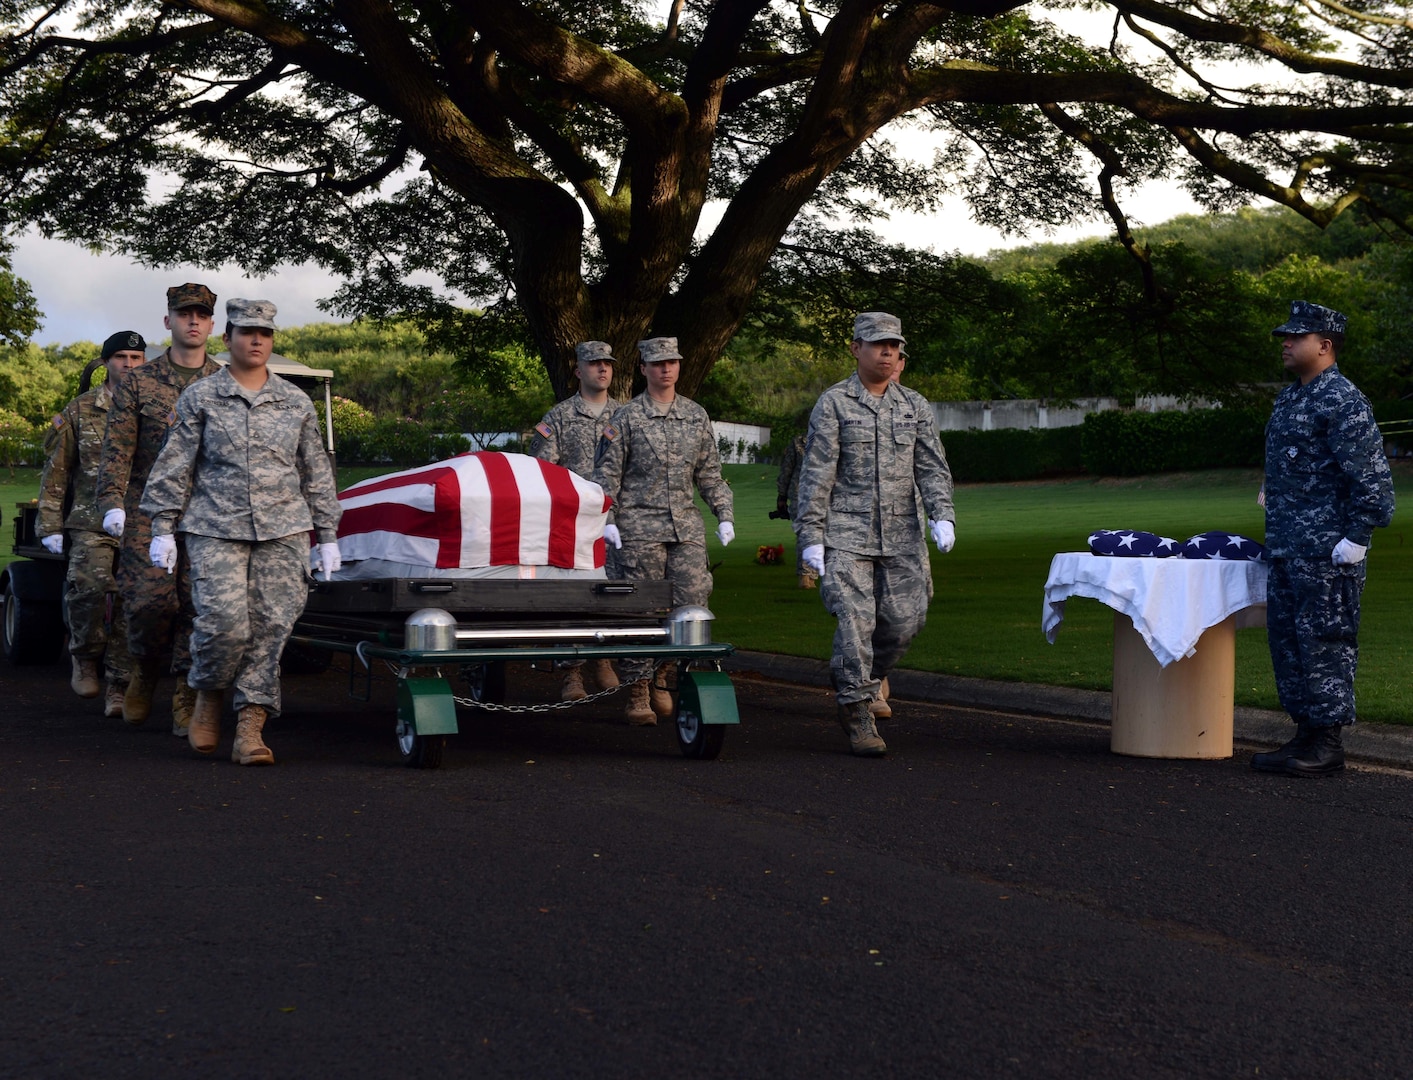 Members of the Defense POW/MIA Accounting Agency (DPAA) march alongside a disinterred casket holding the remains of unknown USS Oklahoma service members during a disinterment ceremony at the National Memorial Cemetery of the Pacific in Honolulu, Nov. 5, 2015. Today’s ceremony was the final disinterment for the USS Oklahoma. The DPAA mission is to provide the fullest possible accounting for our missing personnel to their families and the nation. (U.S. Air Force photo by Staff Sgt. La'Shanette Garrett/Released)